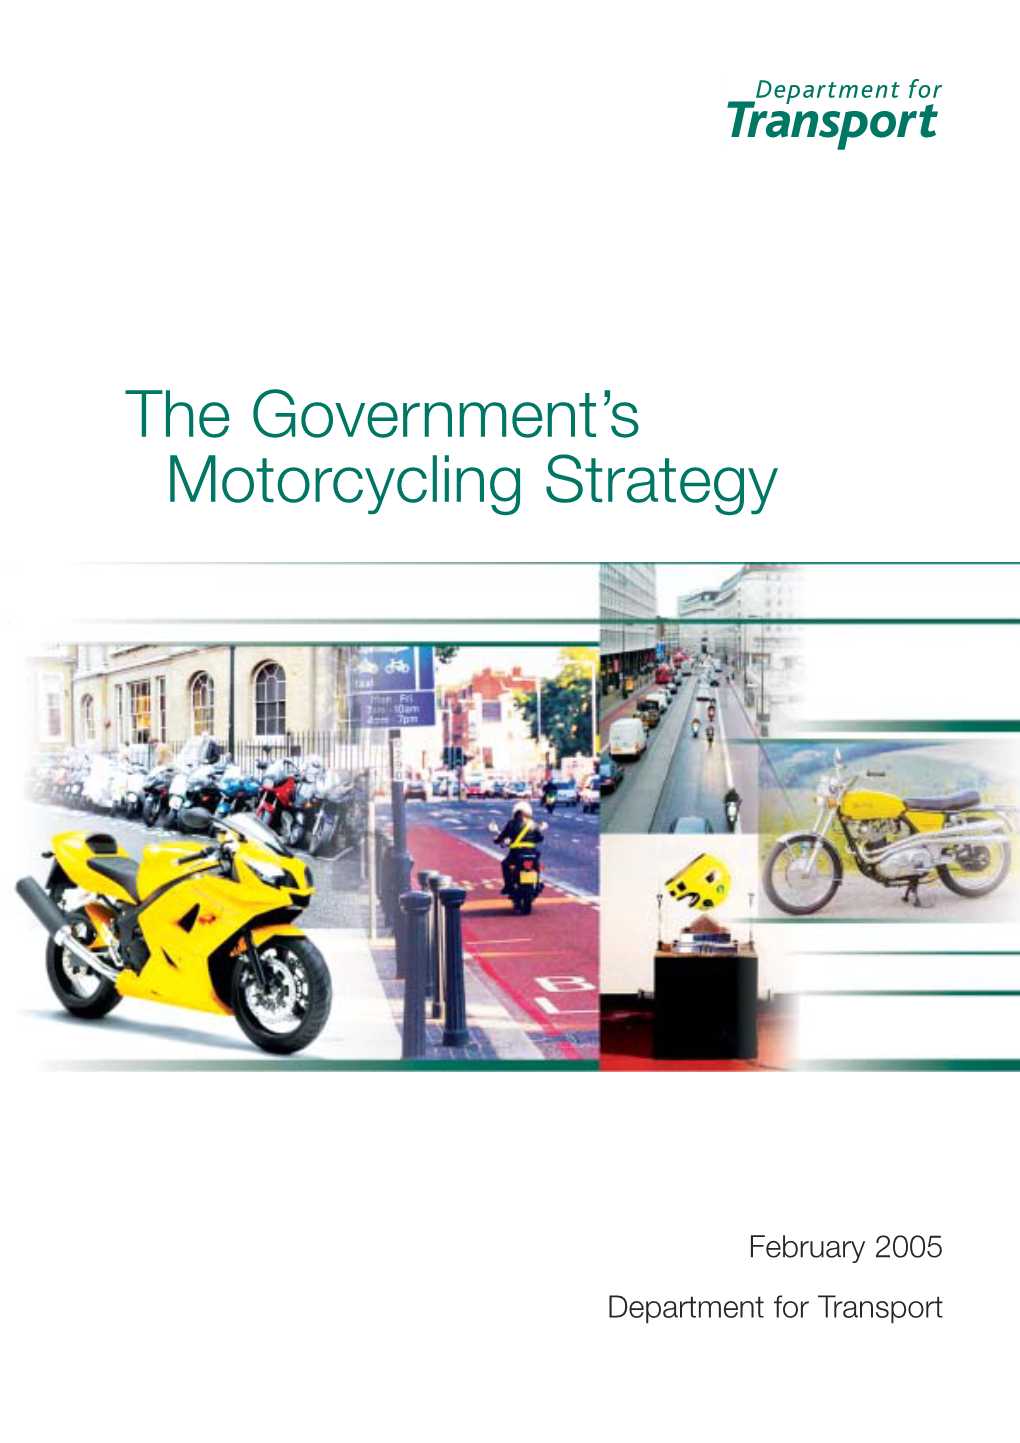 The Government's Motorcycling Strategy